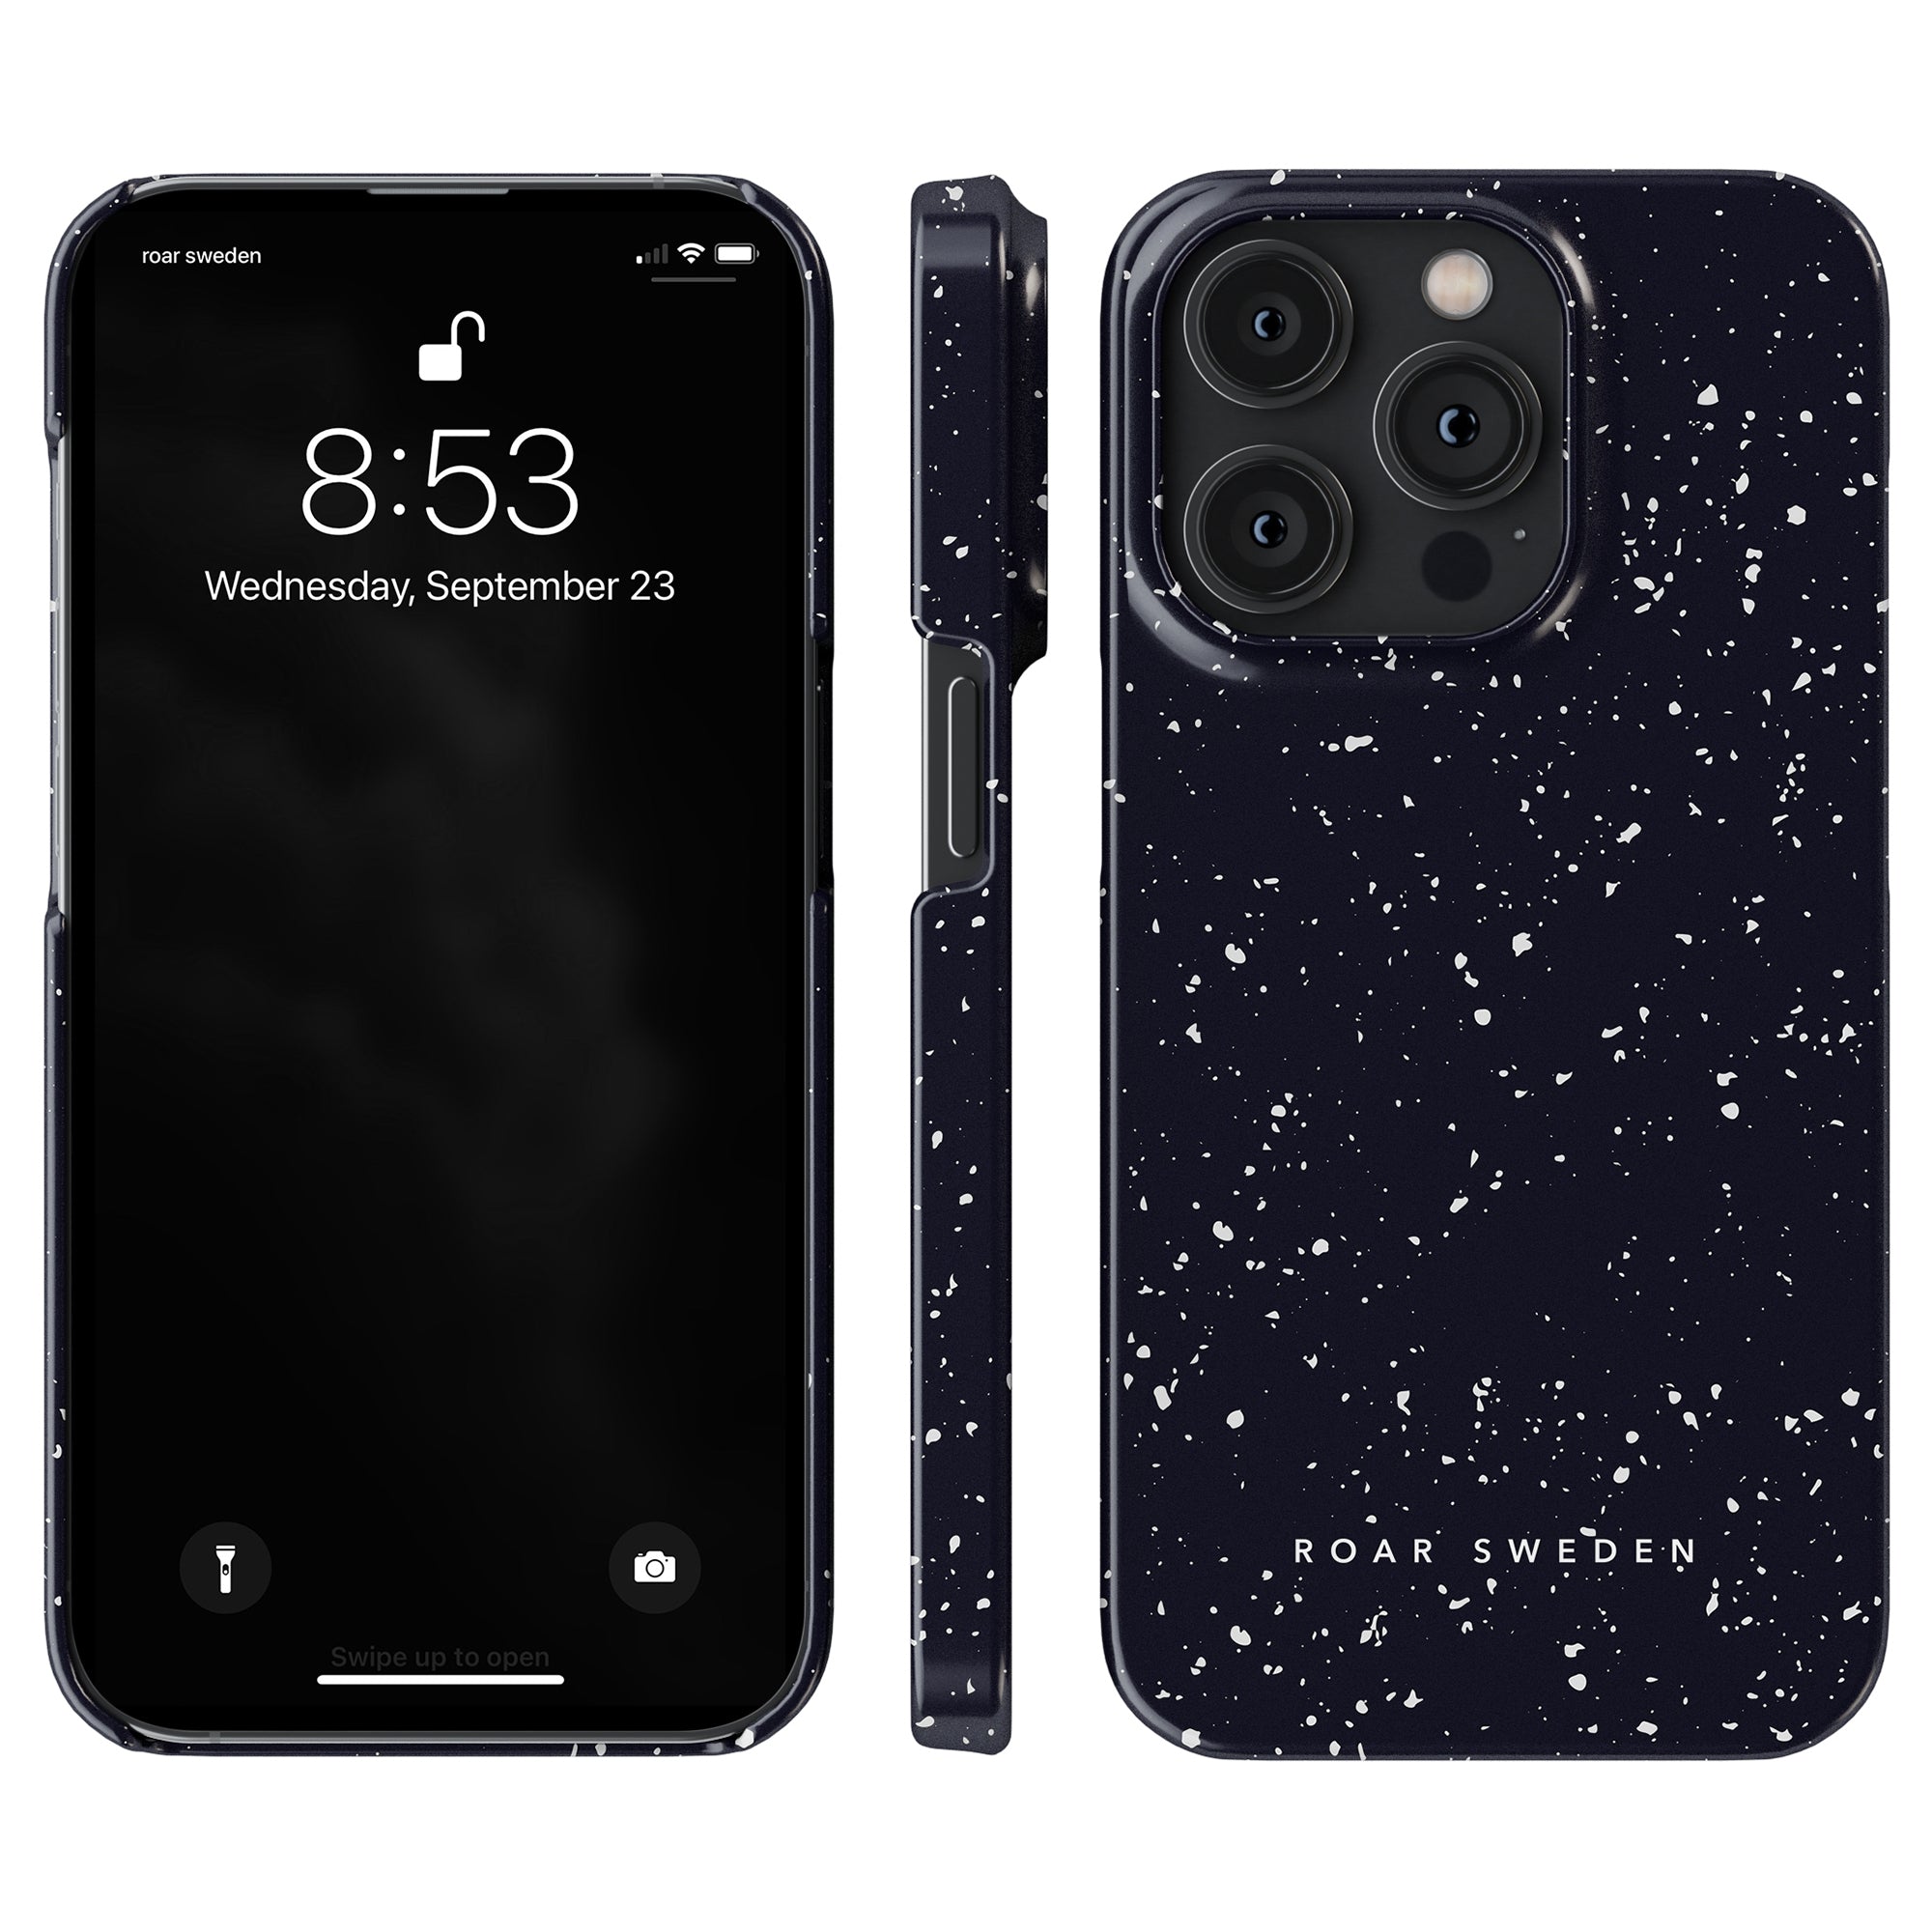 Black smartphone with a Night Stars - Slim case viewed from the front, side, and back.